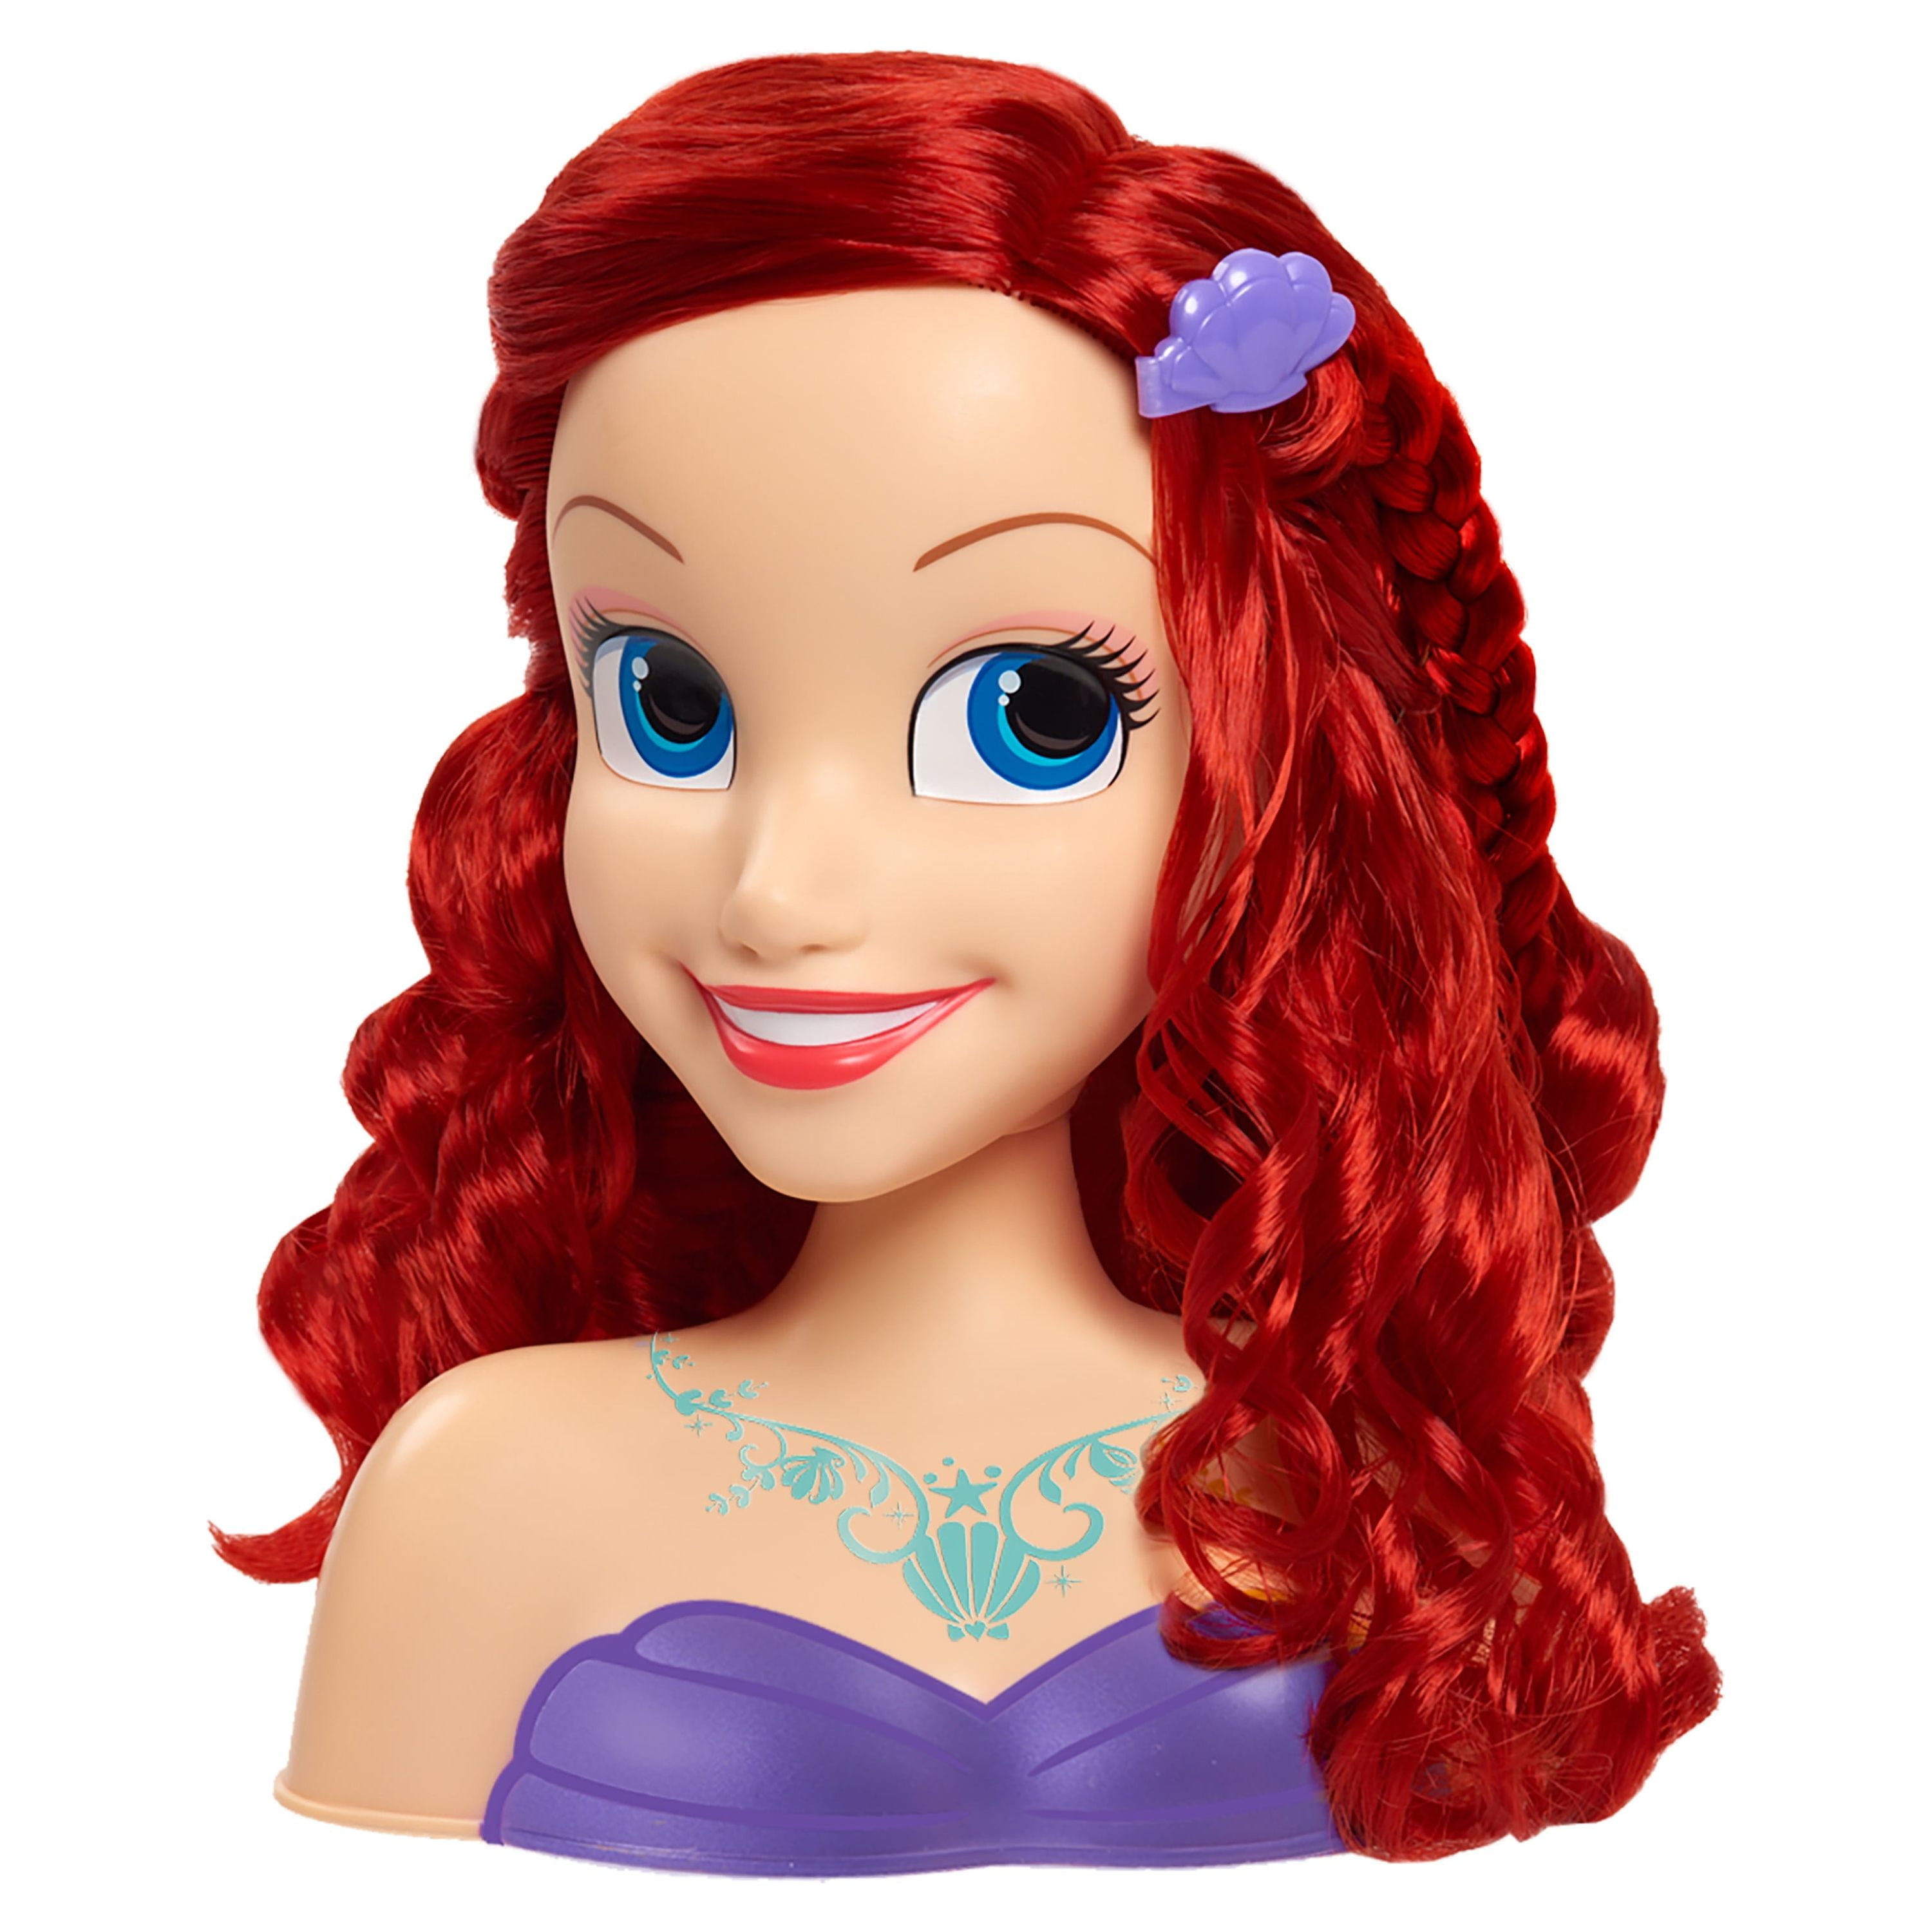 Princess Ariel - The Little Mermaid and Eric Romance Doll … | Flickr